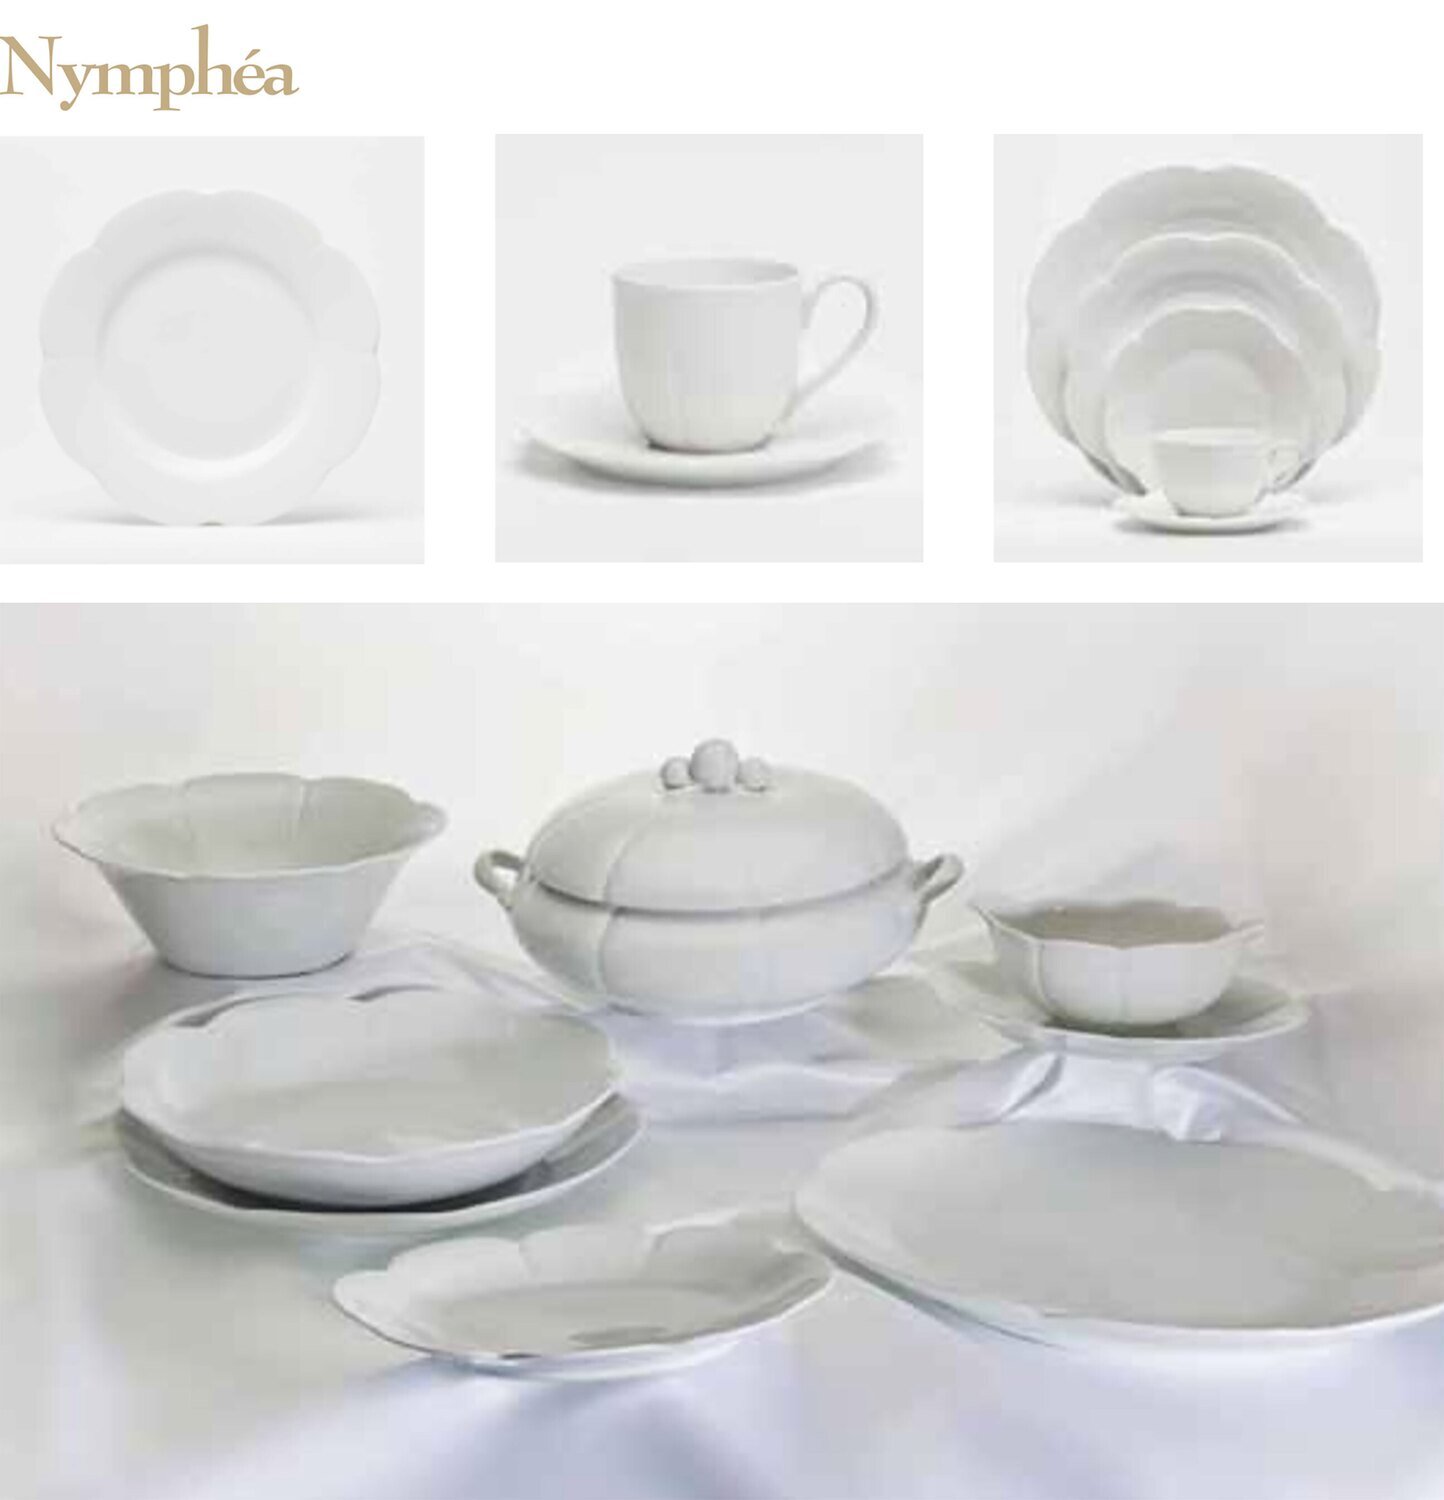 Royal Limoges Nymphea White Cream Soup Cup R500-NYM00001